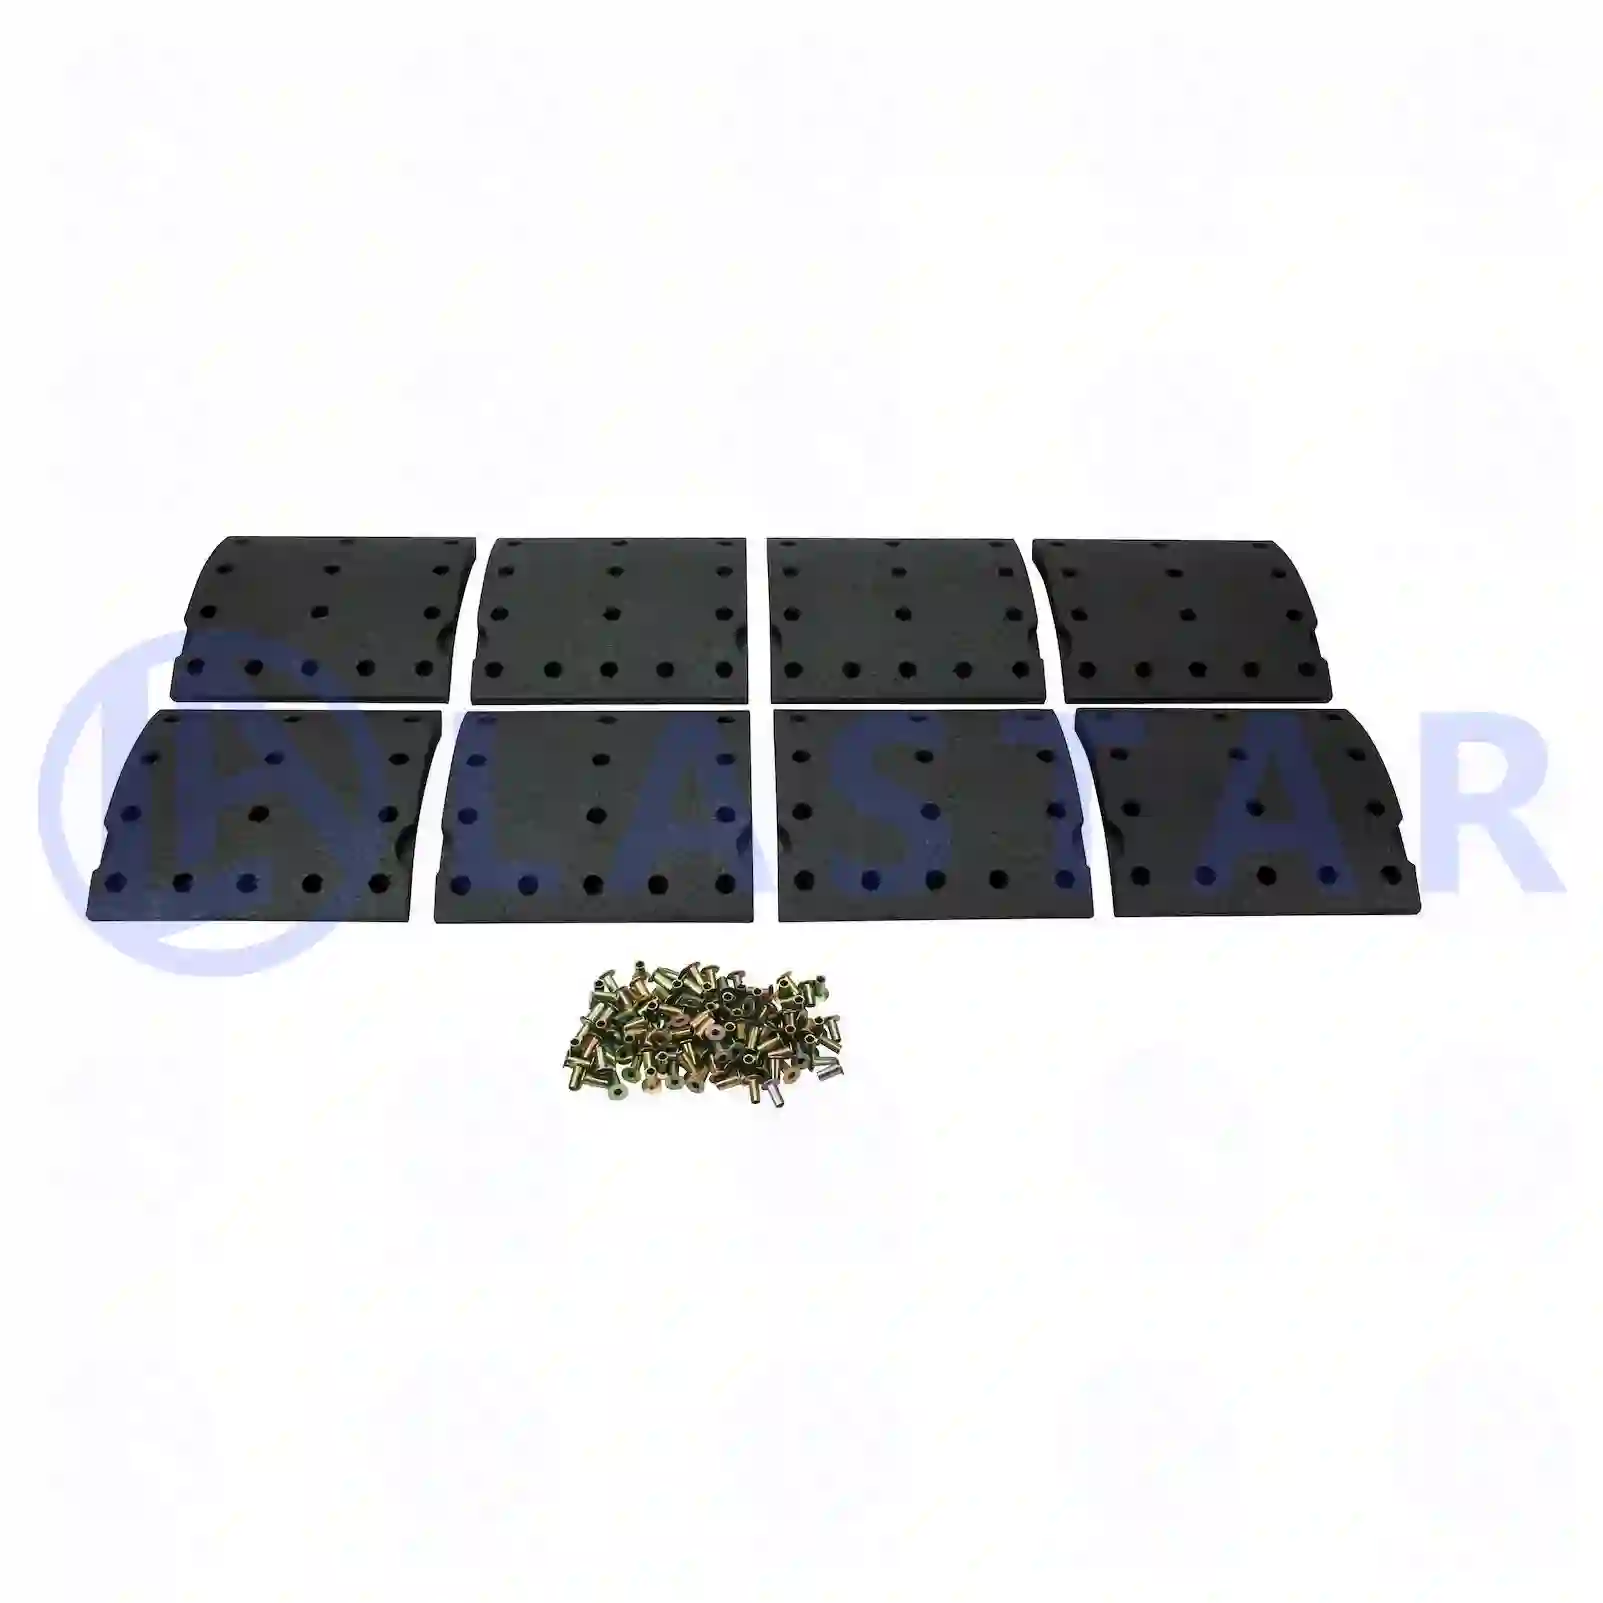 Drum brake lining kit, axle kit, 77713624, 1522138, 5001868089, 7421534386, MBLK1190, 89200340825, 21534385, 21534385S, 270520, 270520S, 270836, 270836S, 2708361, 270942, 270942S, 2709426, 270976, 270976S, 2709765, 275996, 275996S, 3090349, 3090349S, 3091458, 3091458S, 3093263, 3095169, 3095169S, 3095179, 3095179S, 3095189, 3095189S, ZG50449-0008 ||  77713624 Lastar Spare Part | Truck Spare Parts, Auotomotive Spare Parts Drum brake lining kit, axle kit, 77713624, 1522138, 5001868089, 7421534386, MBLK1190, 89200340825, 21534385, 21534385S, 270520, 270520S, 270836, 270836S, 2708361, 270942, 270942S, 2709426, 270976, 270976S, 2709765, 275996, 275996S, 3090349, 3090349S, 3091458, 3091458S, 3093263, 3095169, 3095169S, 3095179, 3095179S, 3095189, 3095189S, ZG50449-0008 ||  77713624 Lastar Spare Part | Truck Spare Parts, Auotomotive Spare Parts